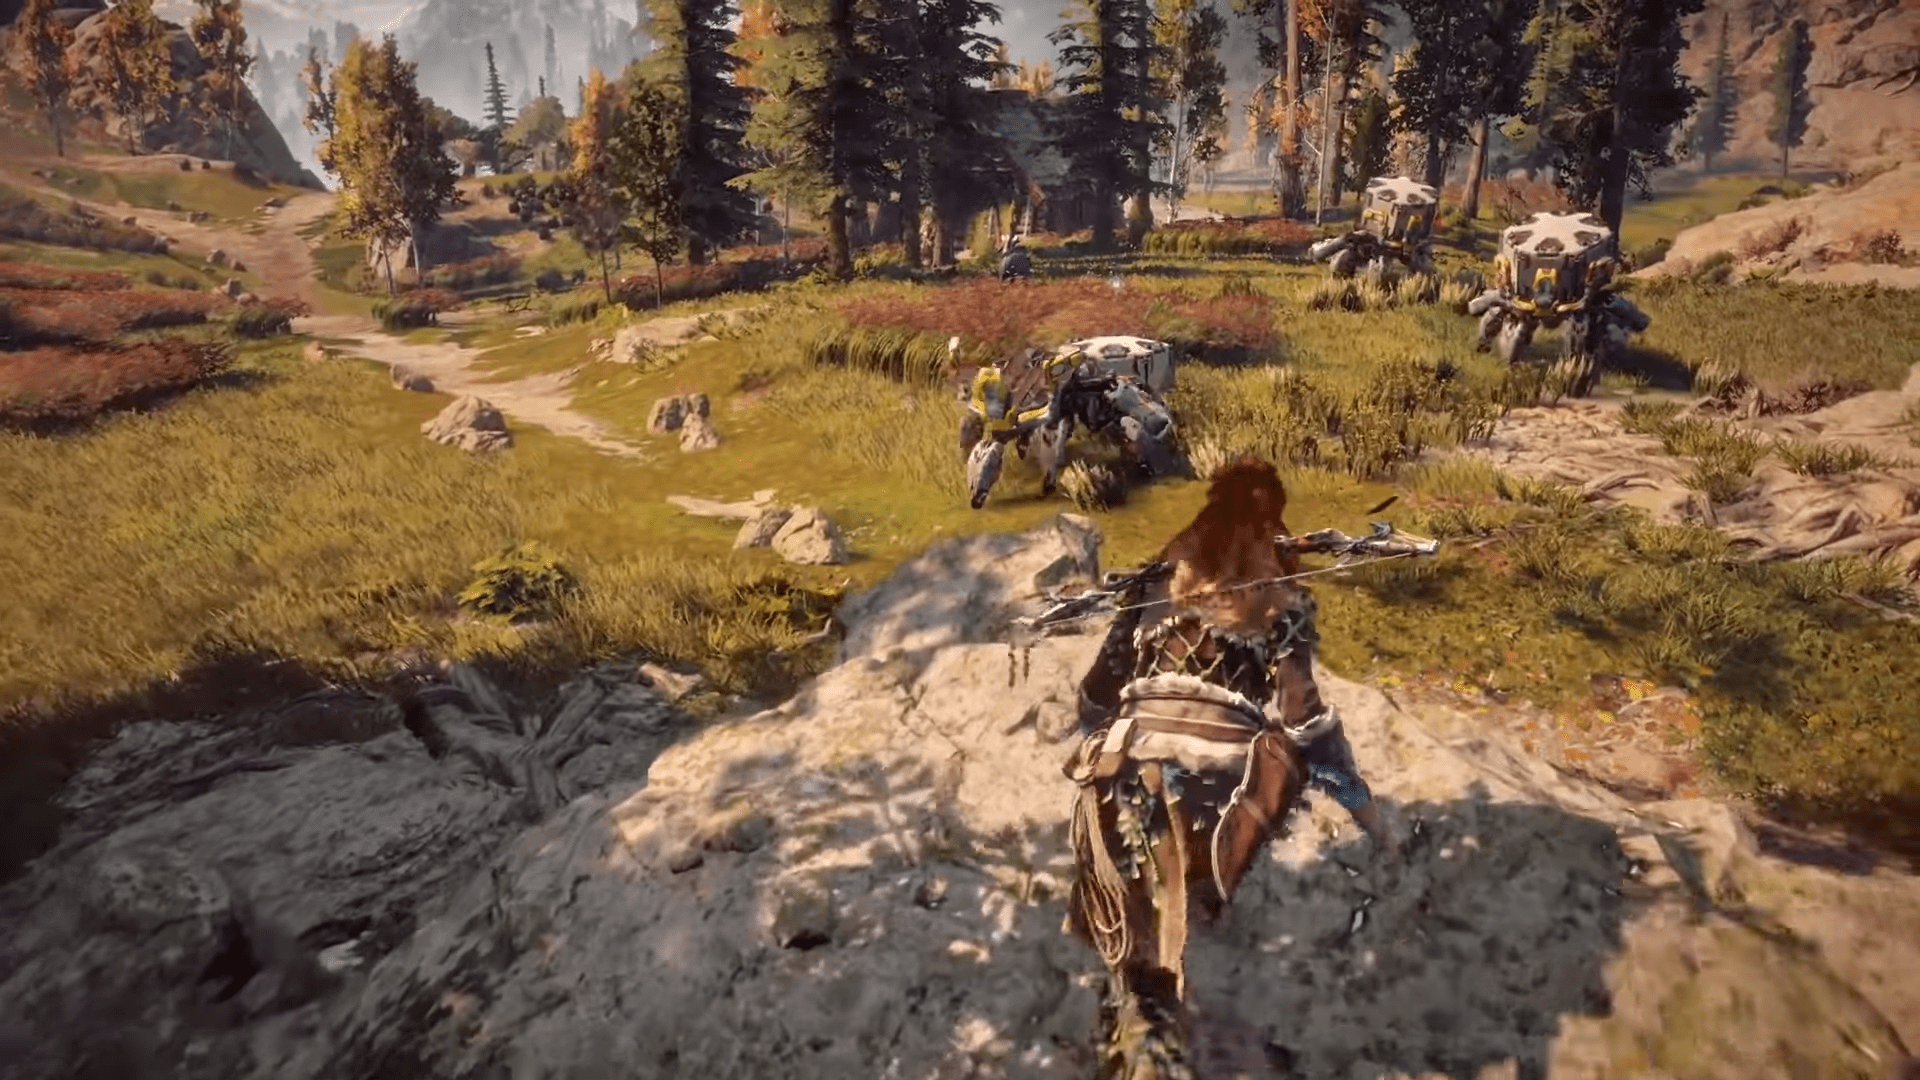 Horizon Zero Dawn Has Been Rumored To Be Coming To PC Surprisingly Soon, Likely False